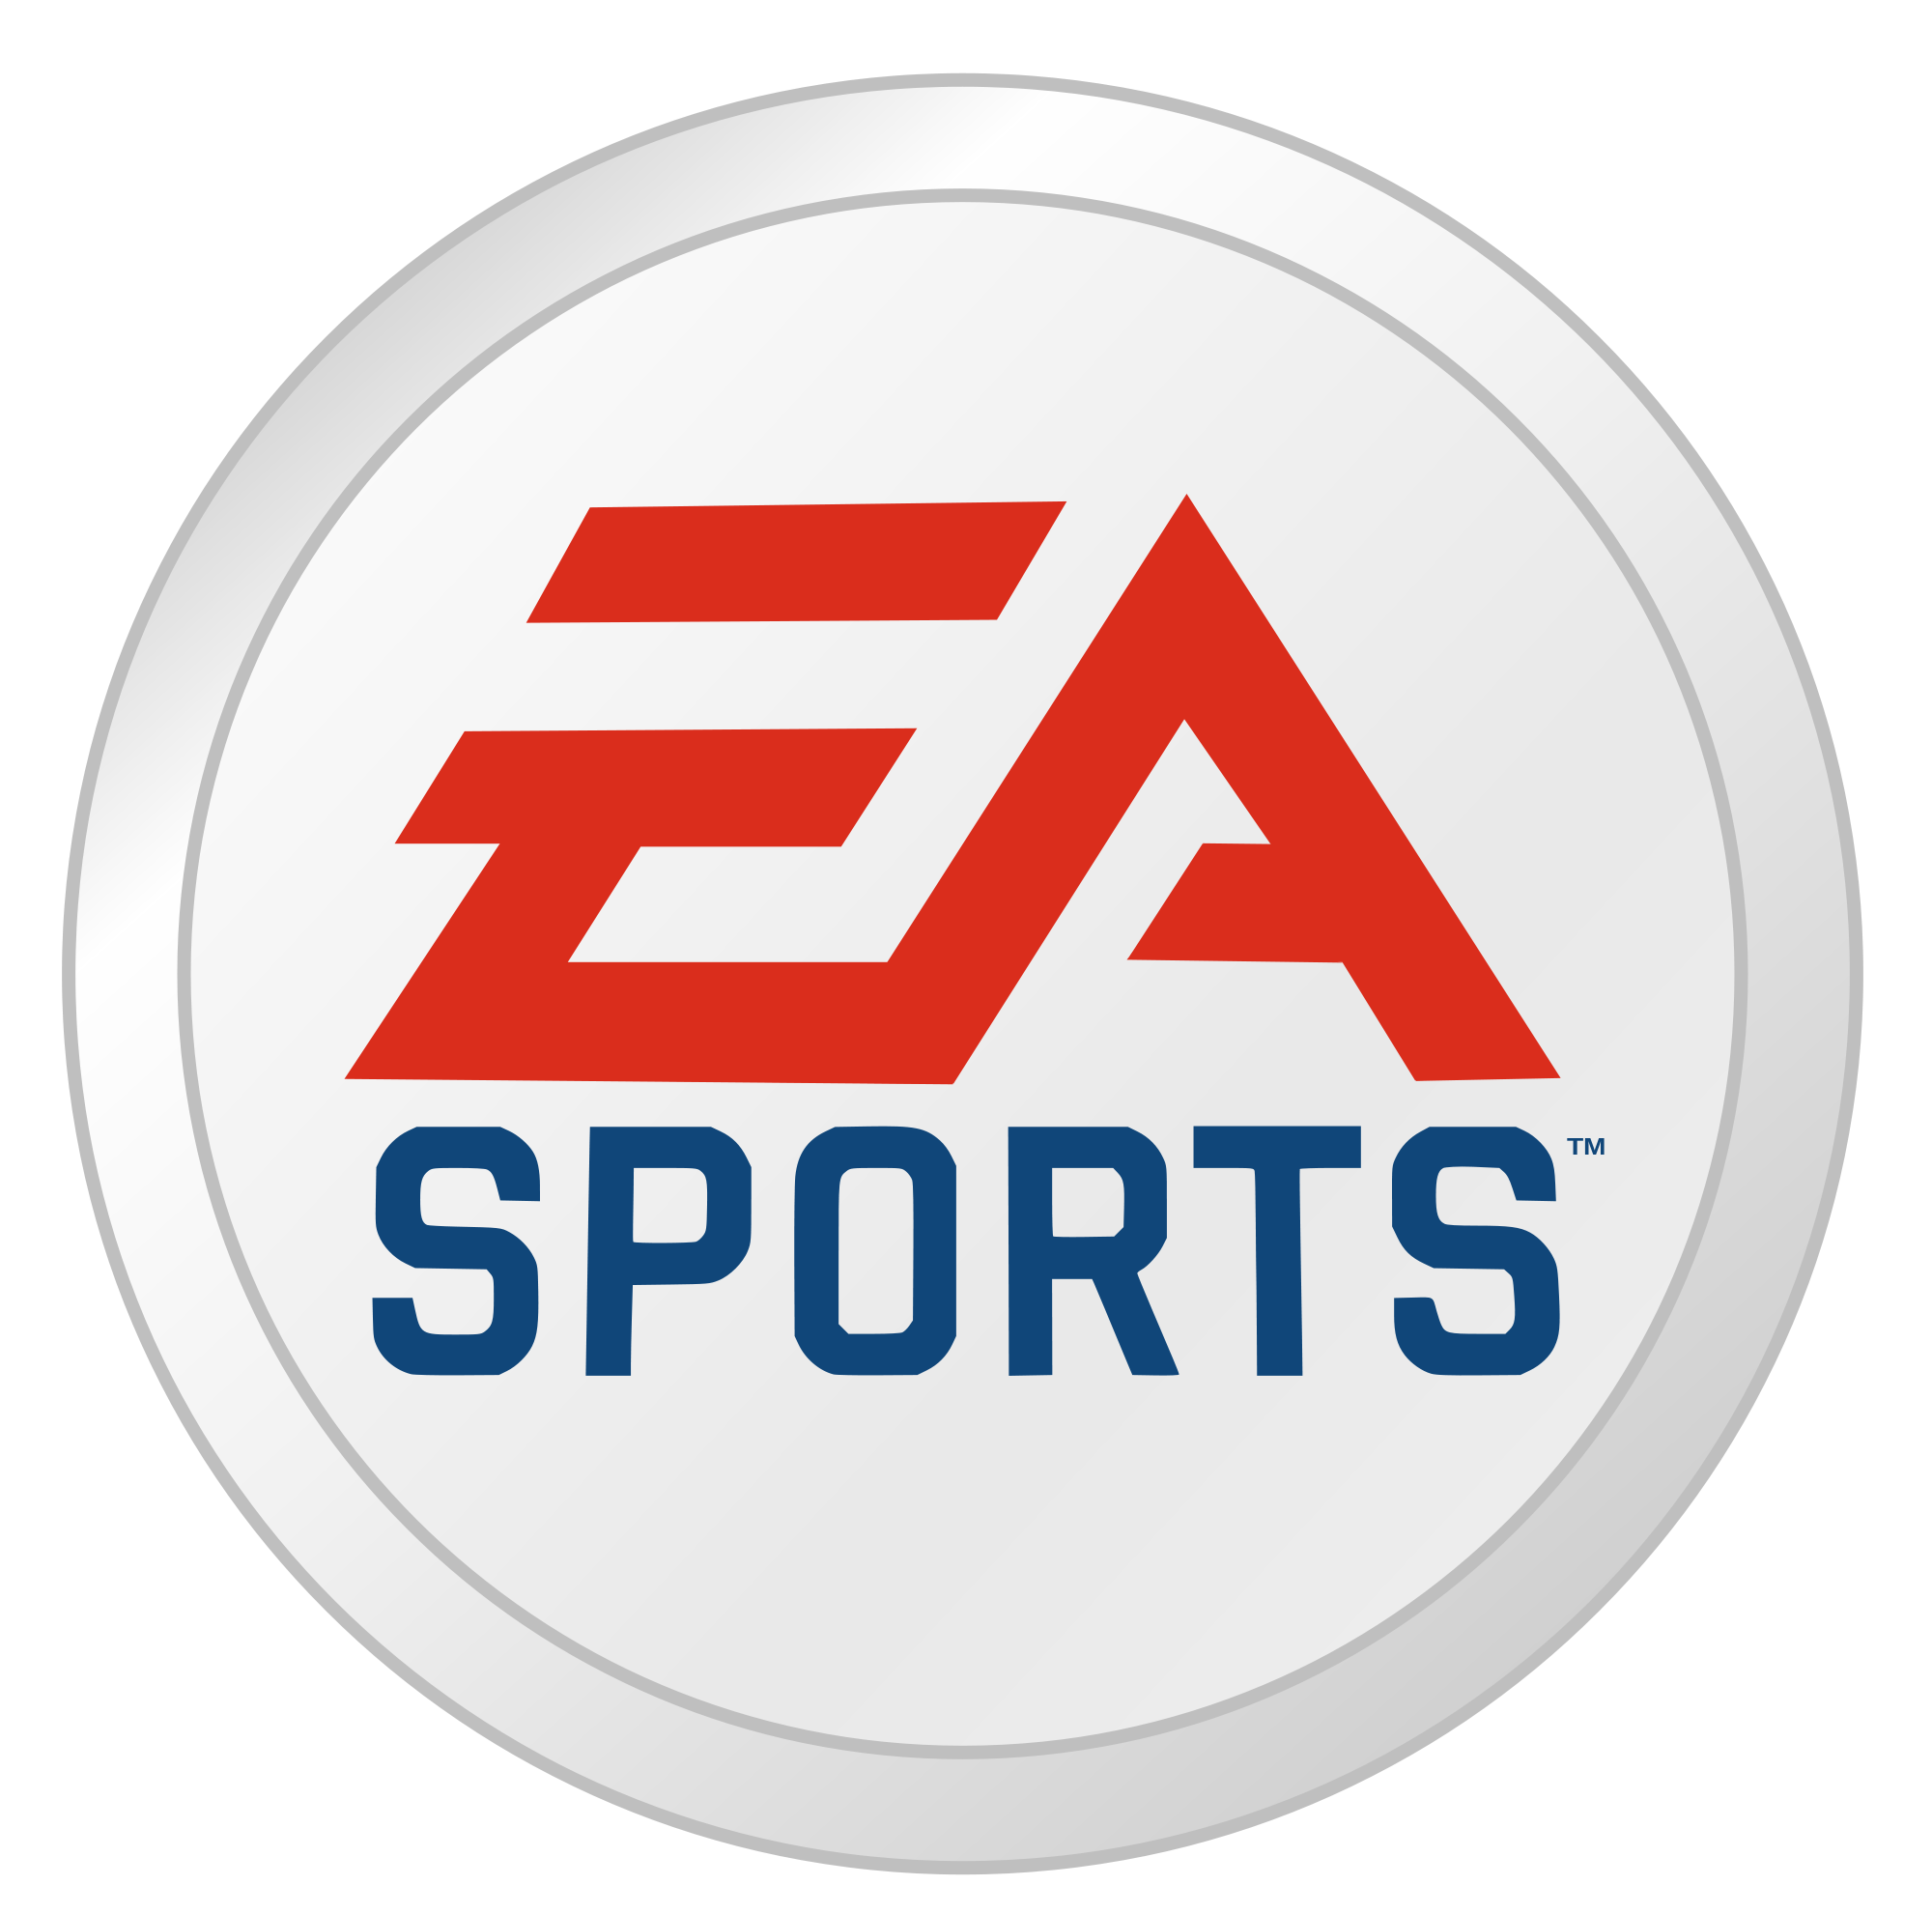 Image - 2000px-Ea Sports logo svg.png - Logopedia, the logo and